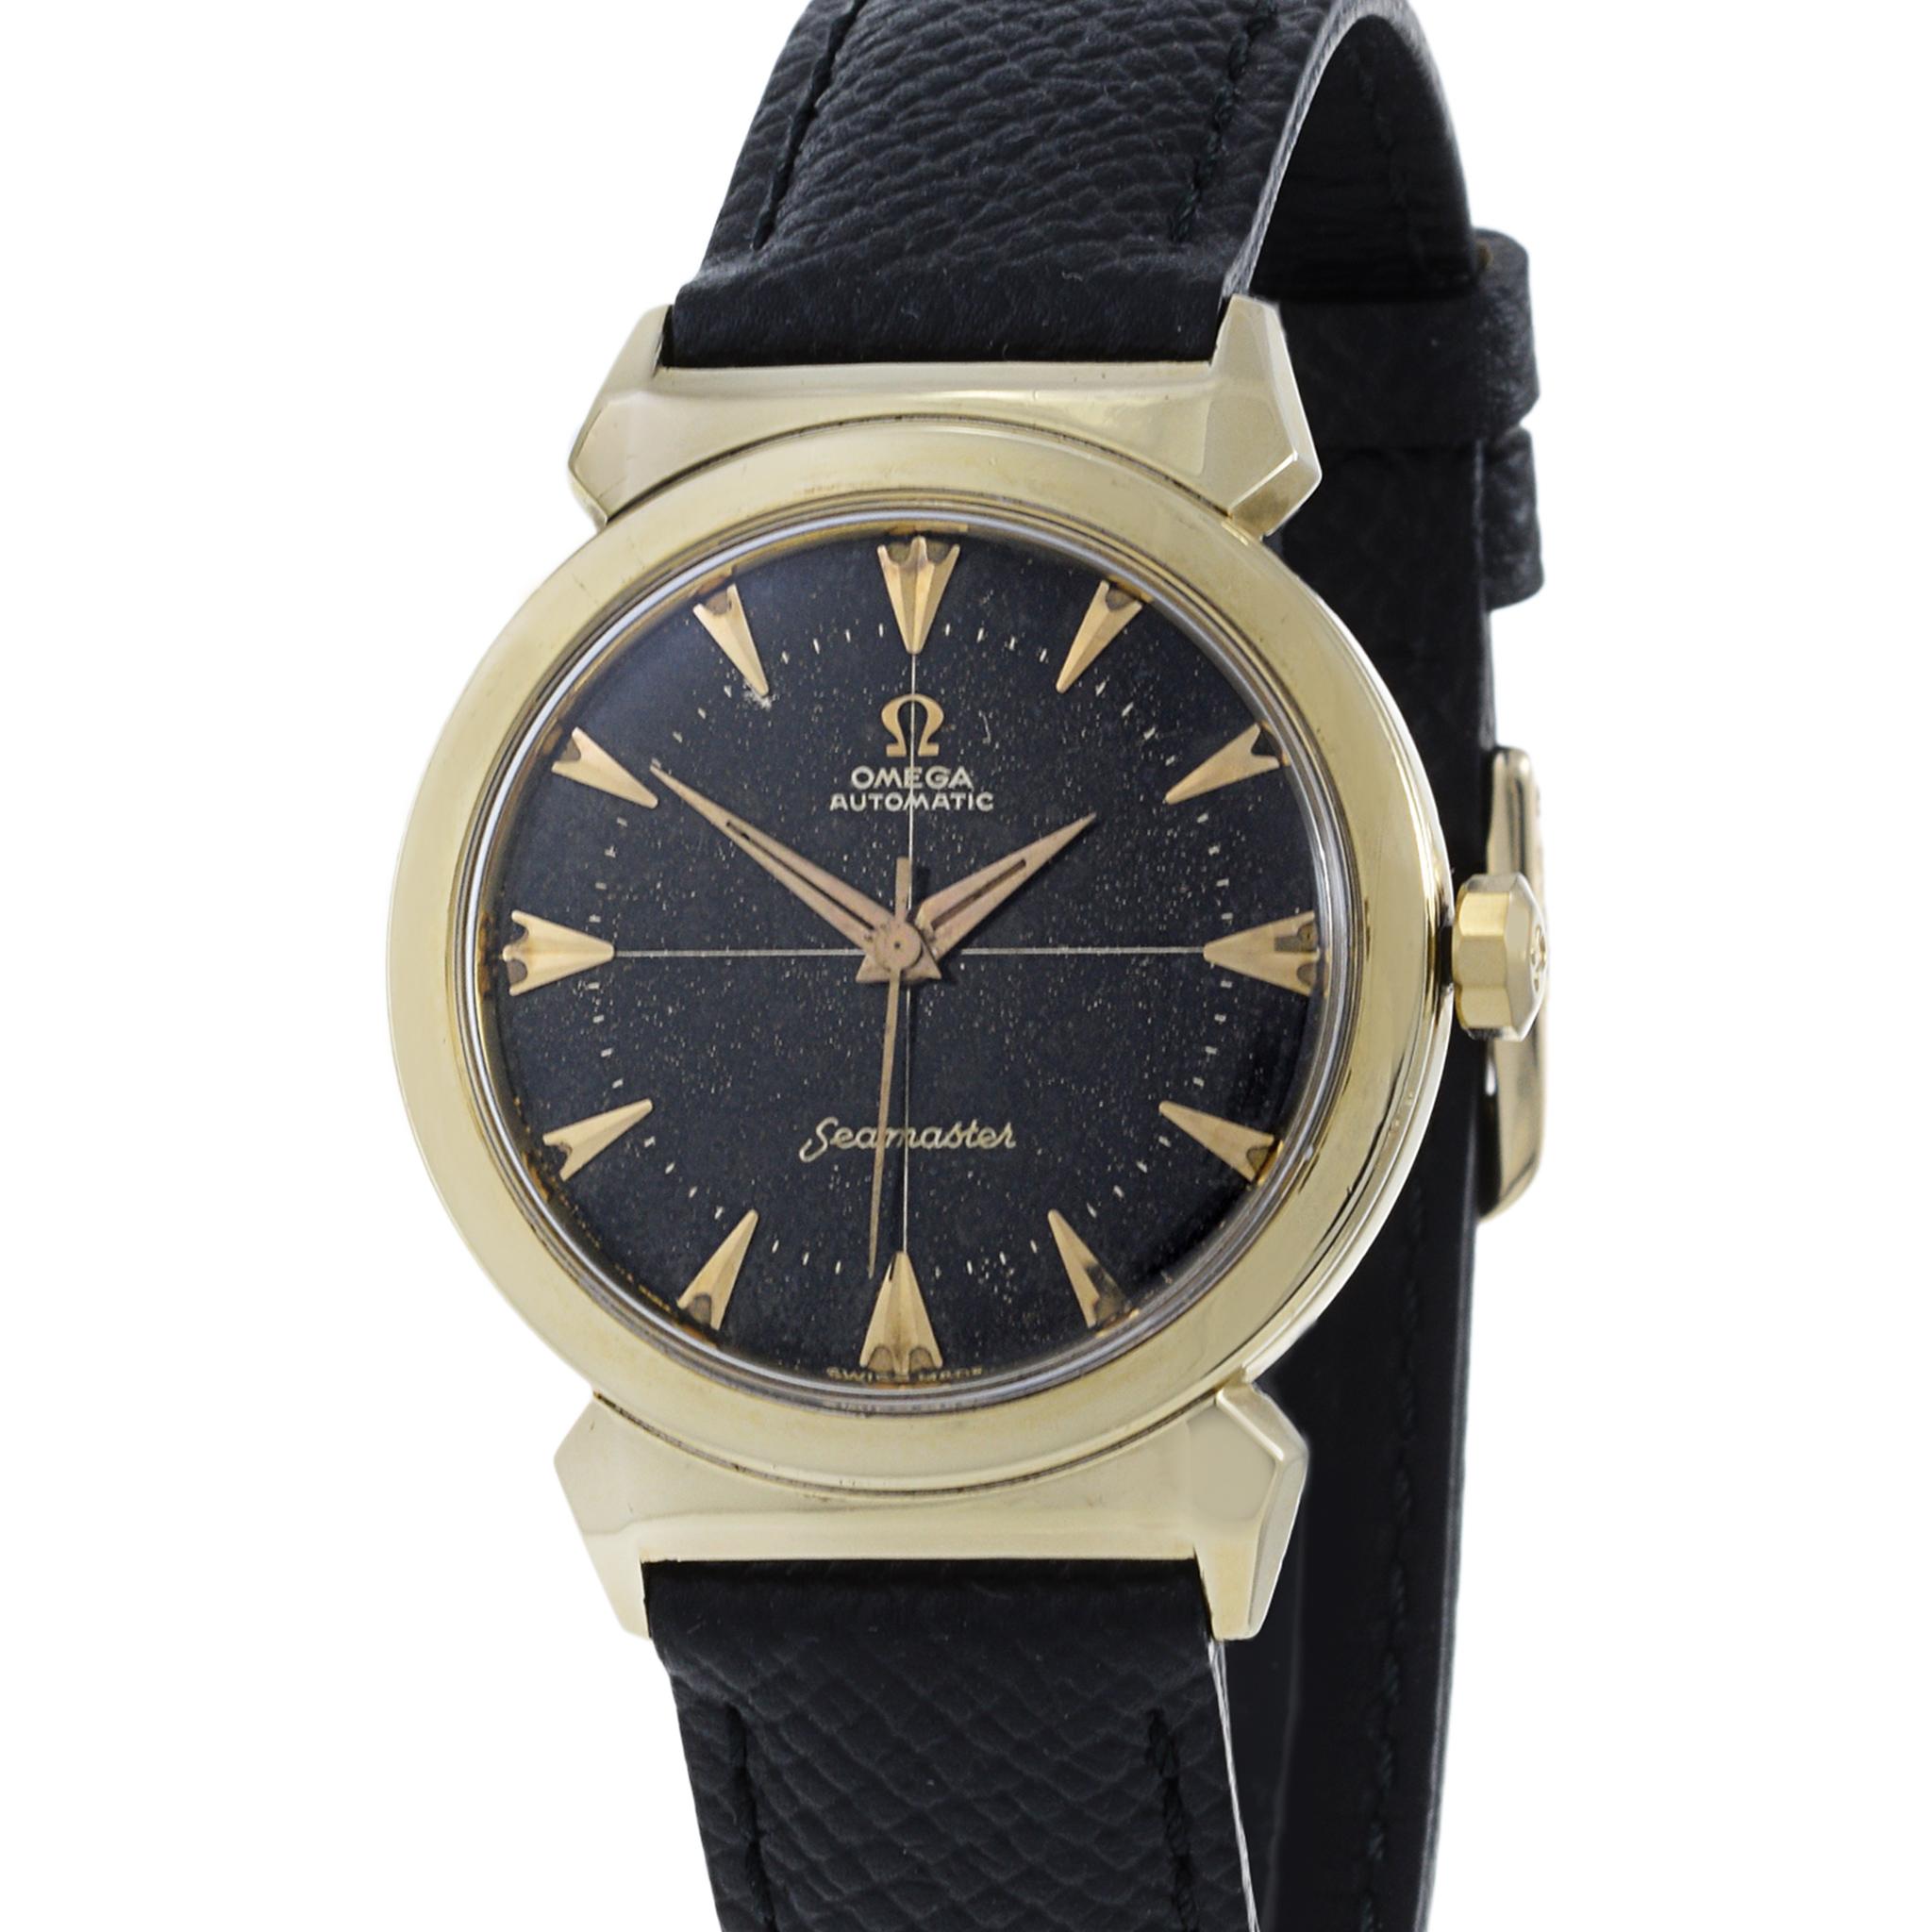 Omega Seamaster Reference 14363 Vintage Scarab Lugs Gold Top In Good Condition For Sale In New York, NY